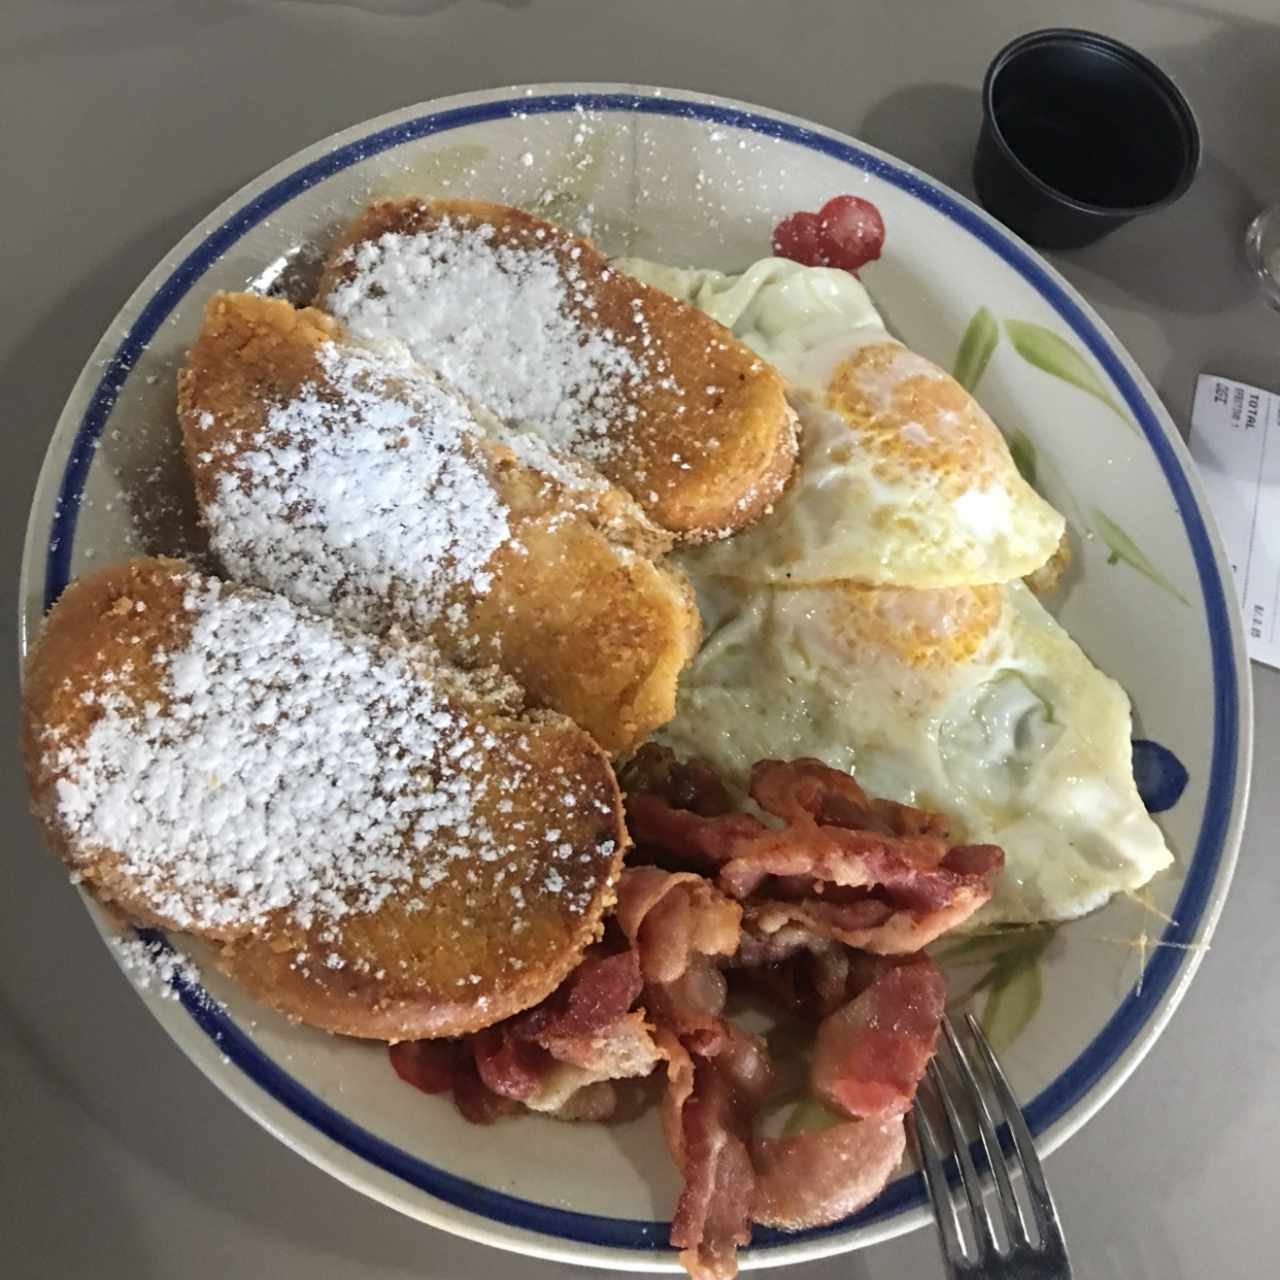 French toast special w/ eggs over easy